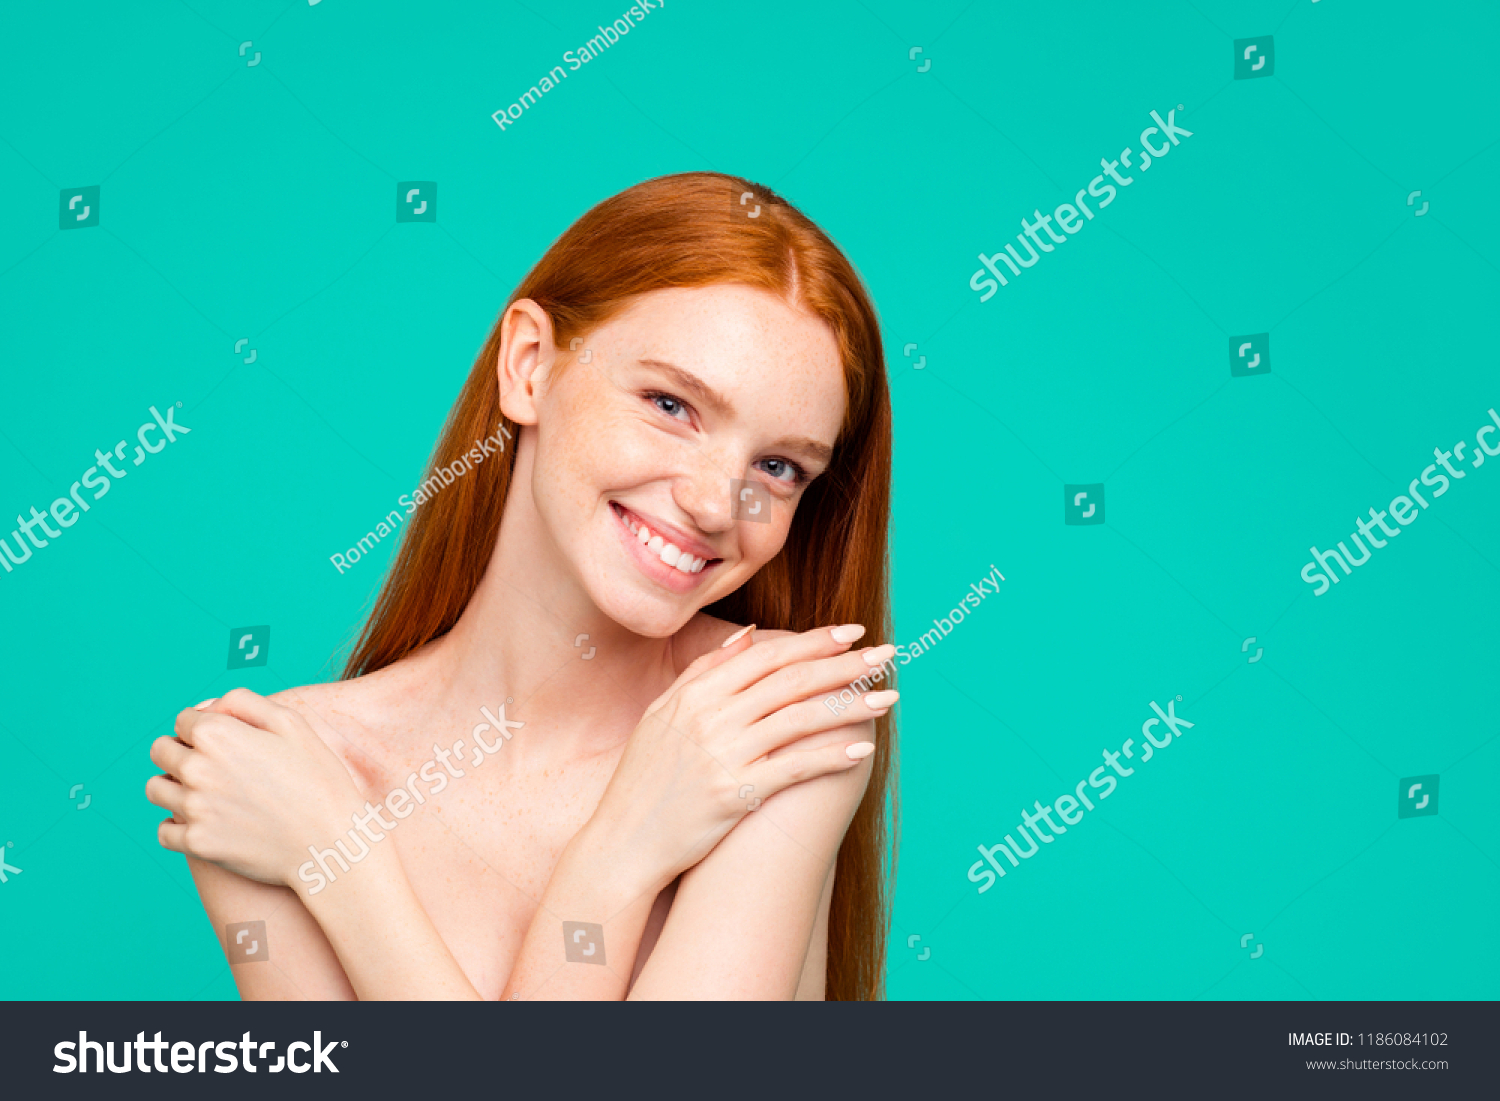 Advertising concept. Portrait of nice perfect nude cheerful red-haired girl with shiny pure clean fresh smooth flawless skin, embracing herself, isolated over green turquoise background #1186084102